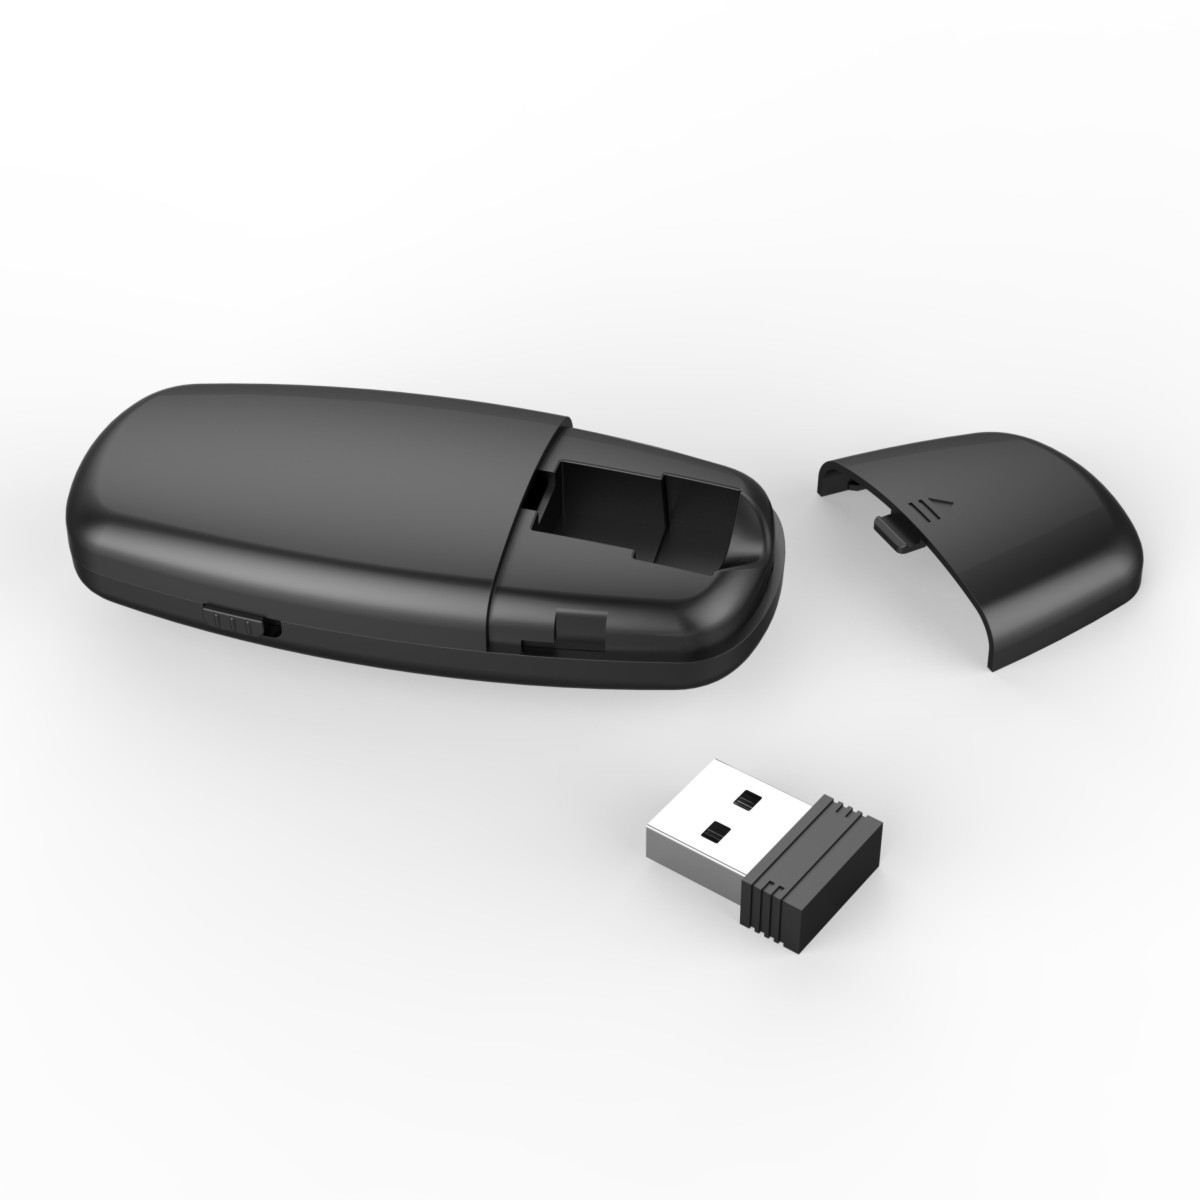 DSIT011---Doosl Red Oval Shap Laser 2.4G Rechargeable Wireless Presenter with Laser Pointer for PPT etc.